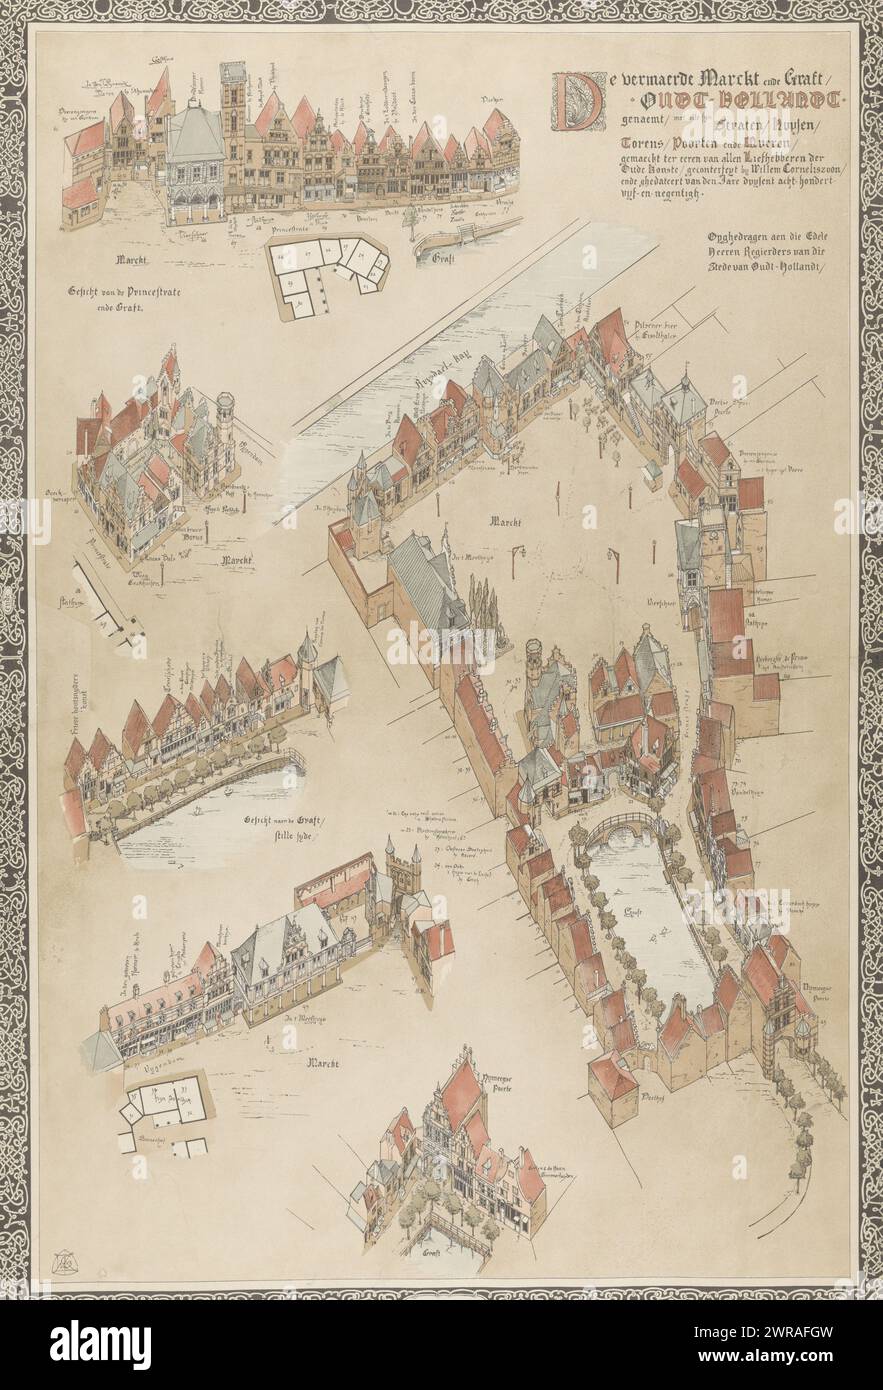 Map of Oud-Holland, 1895, De vermaerde Marckt ende Graft / Oudt-Hollandt genaemt / met alle syn Straten / Huysen (...) made in honor of all Lovers of the Old Art (...). (title on object), Map of the buildings of 'Old Holland', recreated old Dutch buildings on display on the exhibition grounds on the Museumplein in Amsterdam during the World Exhibition of the Hotel and Travel Industry, May-November 1895., print maker: Willem Corneliszoon, printer: Amand, print maker: Netherlands, printer: Amsterdam, 1895, paper, height 995 mm × width 680 mm Stock Photo